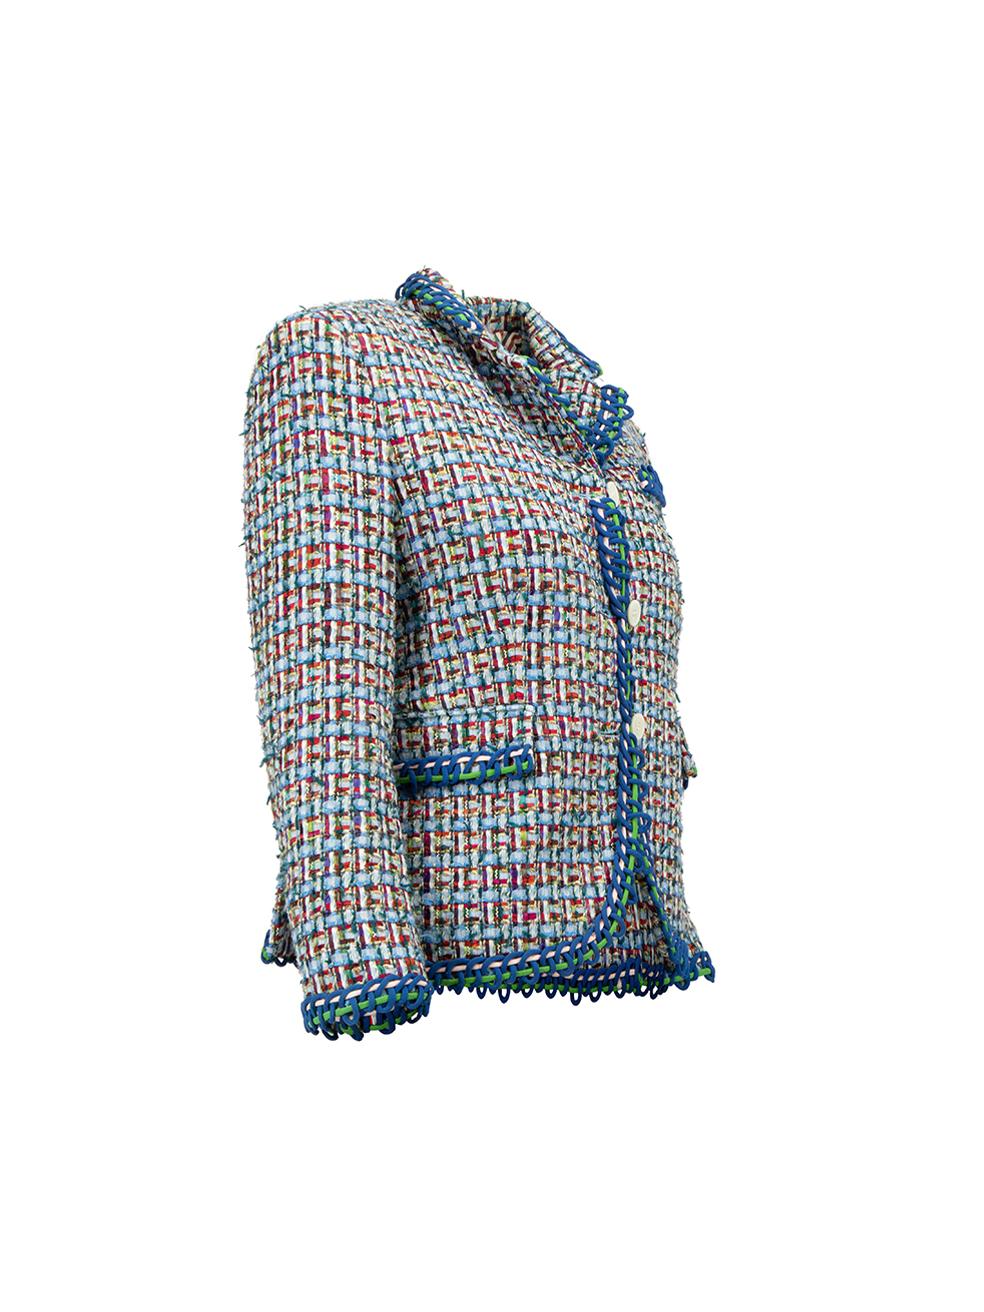 CONDITION is Very good. Minimal wear to jacket is evident. Minimal wear to the outer fabric on this used Thom Browne designer resale item. 
 
 Details
  Blue tone
 Woven tweed
 Fitted blazer
 Single breasted
 Buttoned cuffs
 Front side pockets with